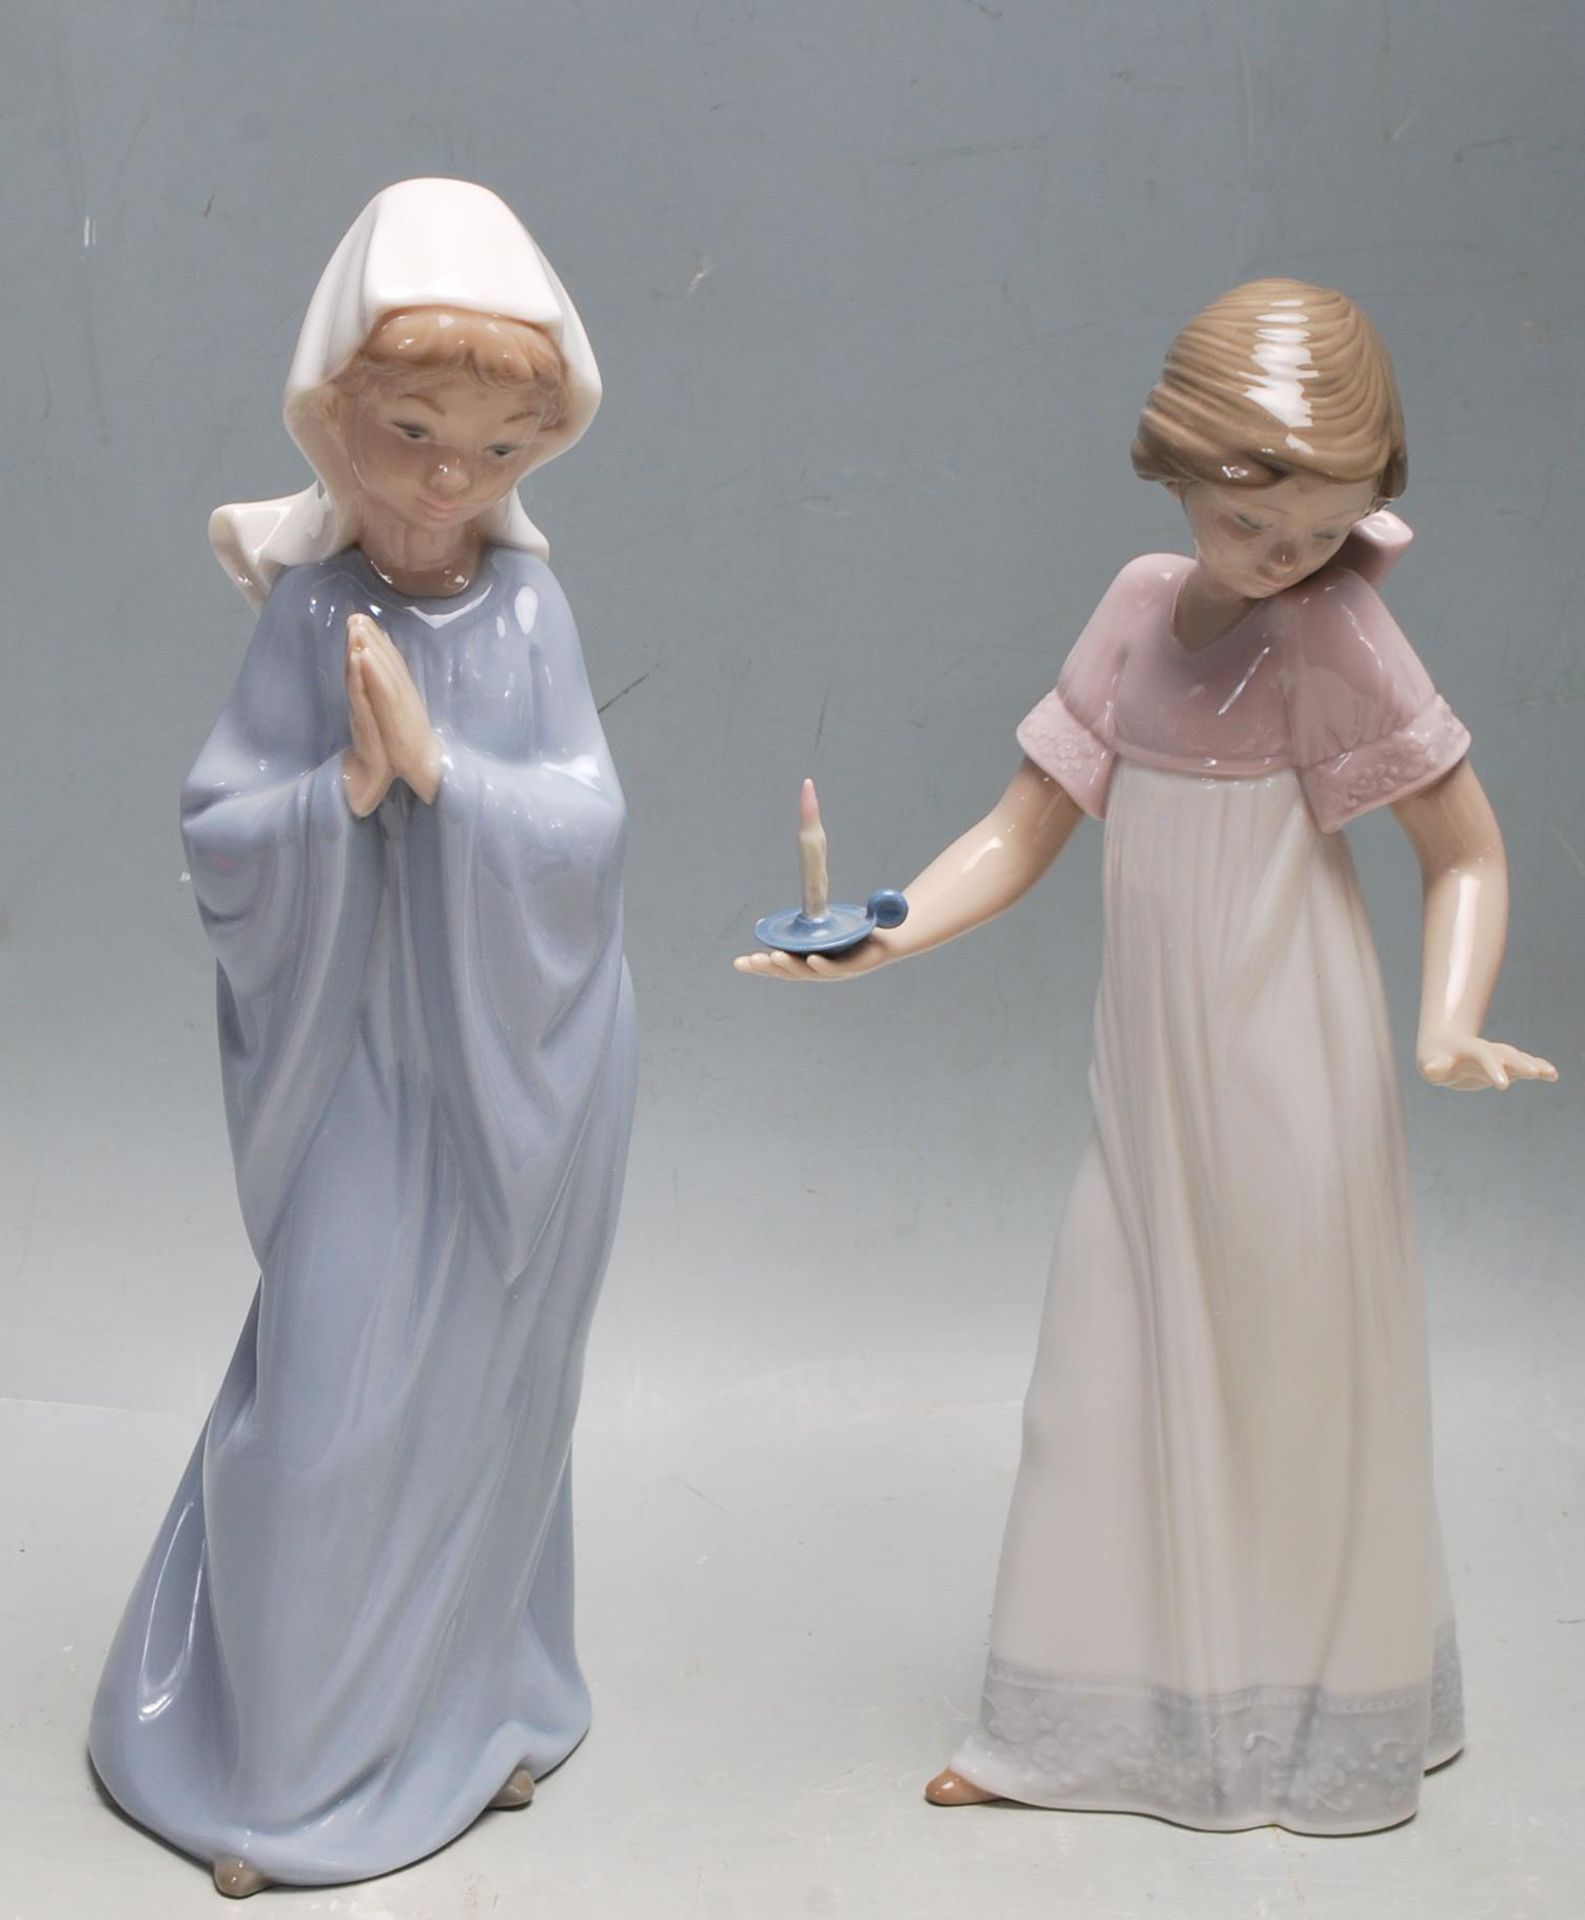 SIX VINTAGE NAO BY LLADRO CERAMIC FIGURINES - Image 6 of 9